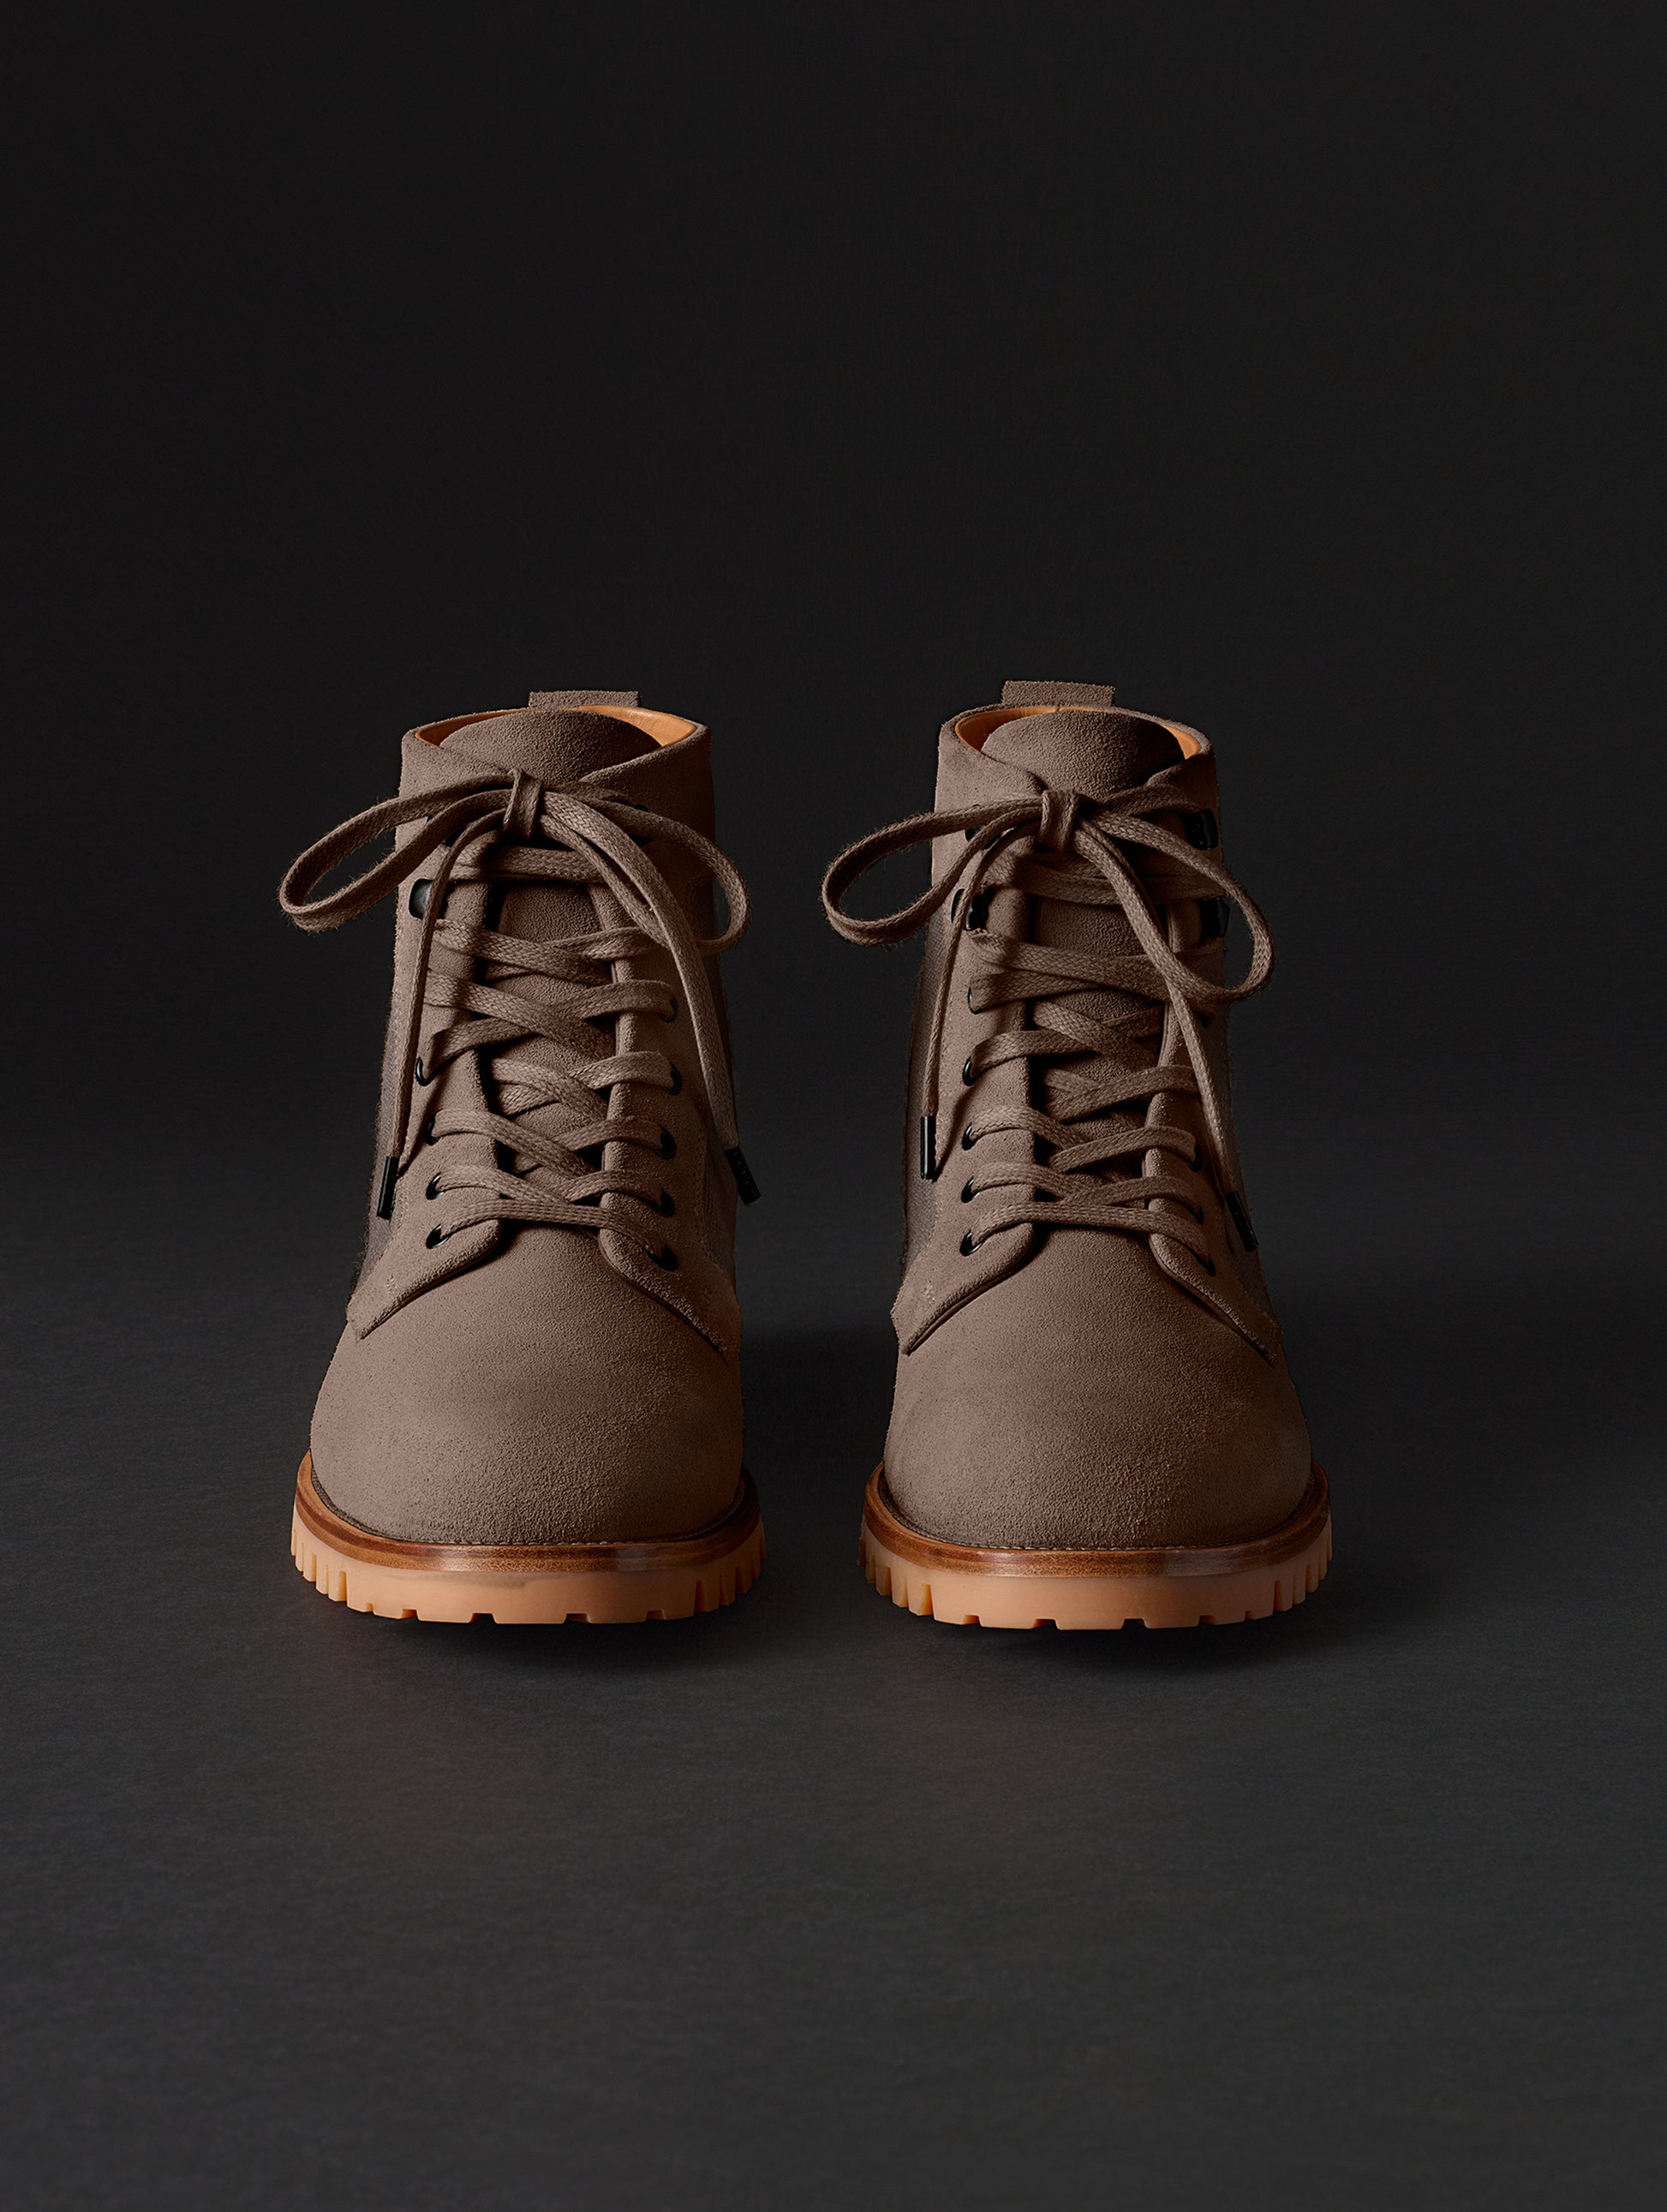 Ojai City Boot in bison brown from AETHER Apparel